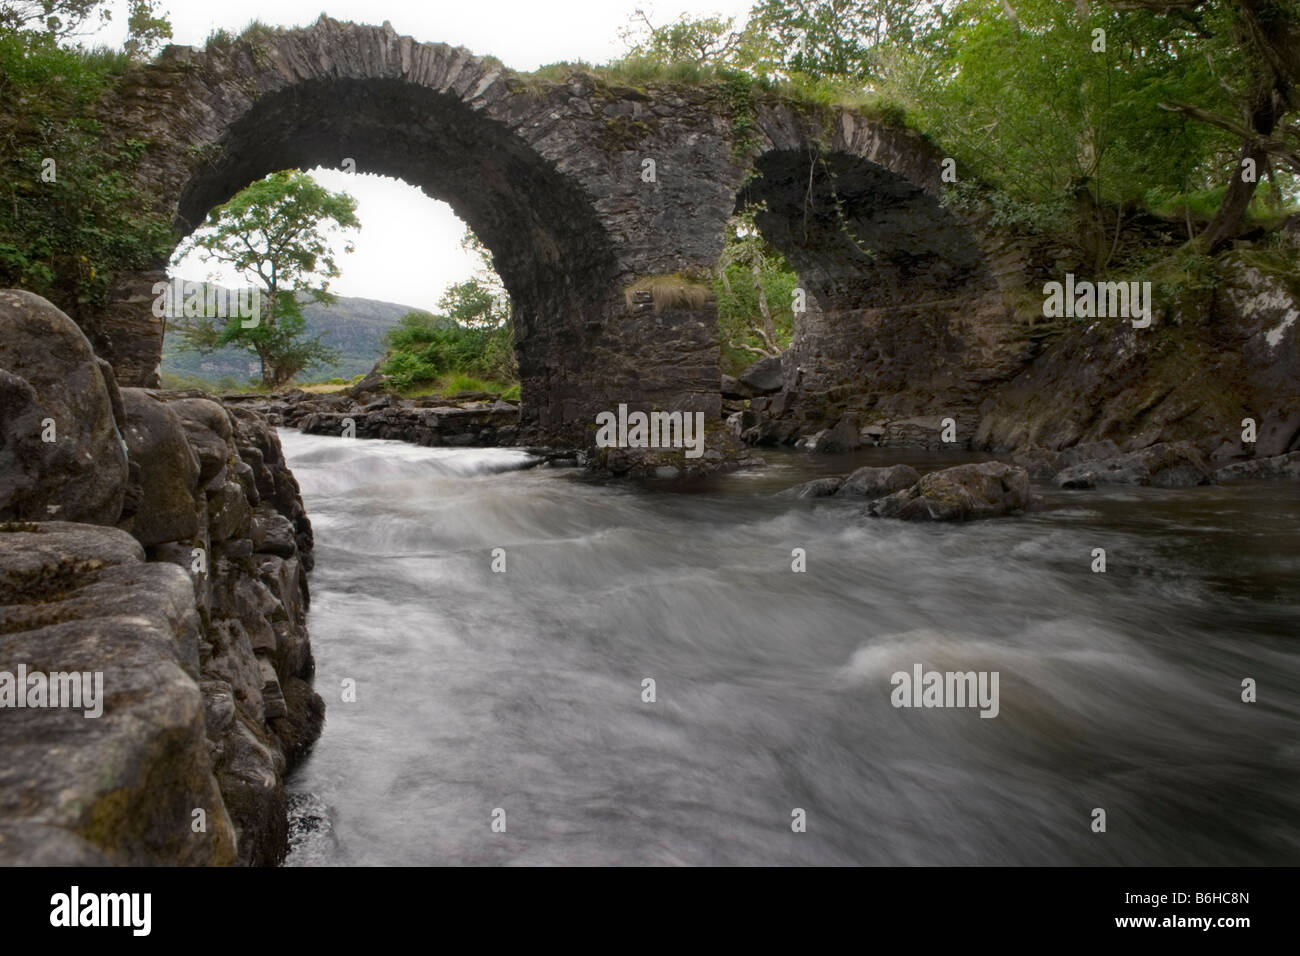 Killarney National Park, County Kerry, Ireland - Near the Meeting of the Waters the water flows fast underneath Old Weir Bridge. Stock Photo